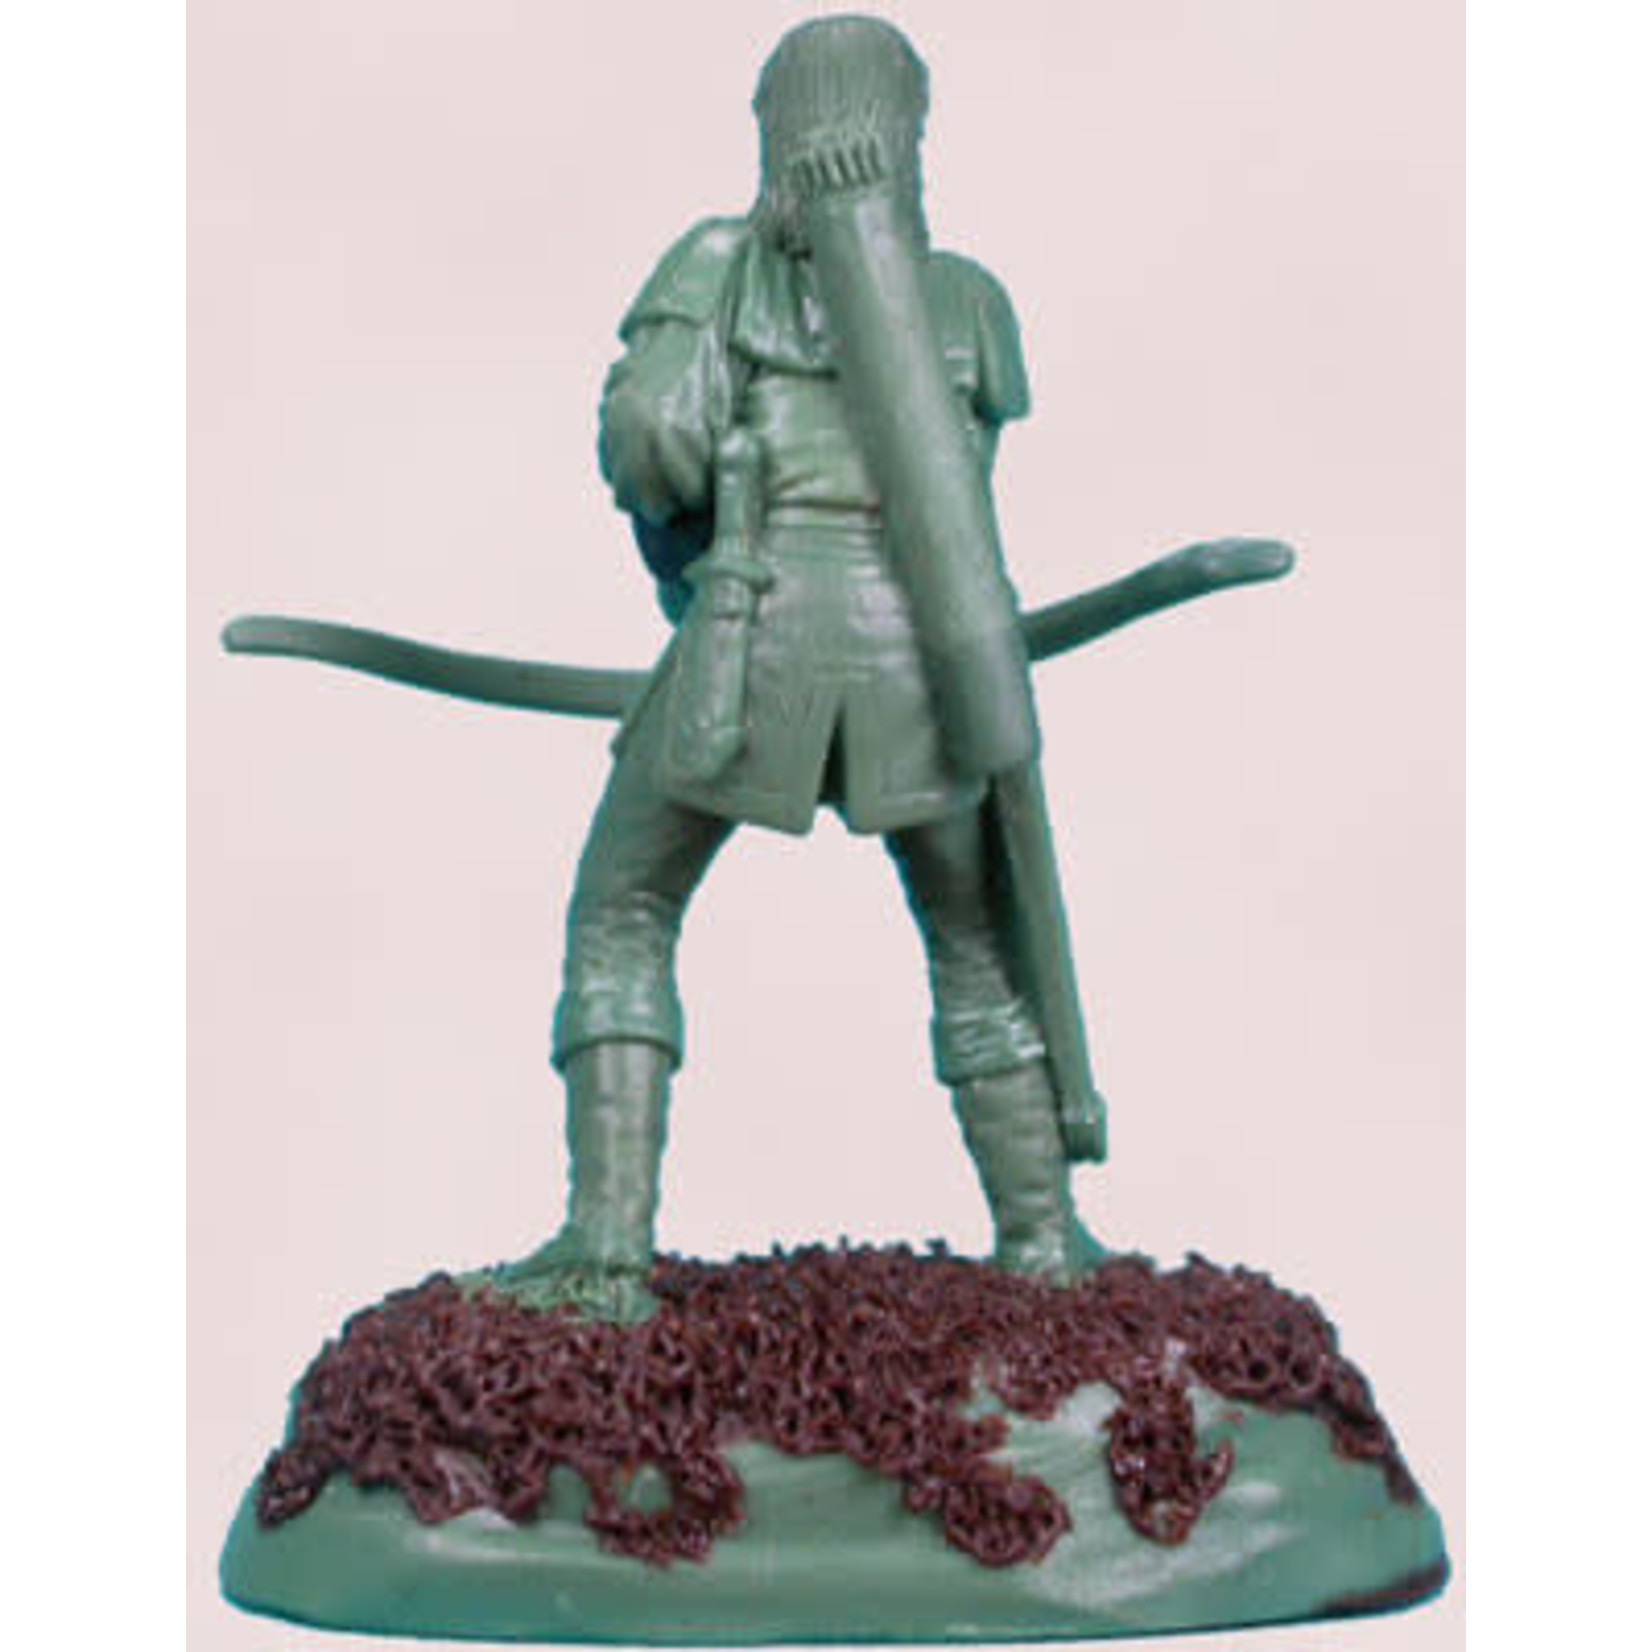 Dark Sword Miniatures Dark Sword Miniatures (Metal) Elmore Masterworks - Prince of the North Male Archer (1)